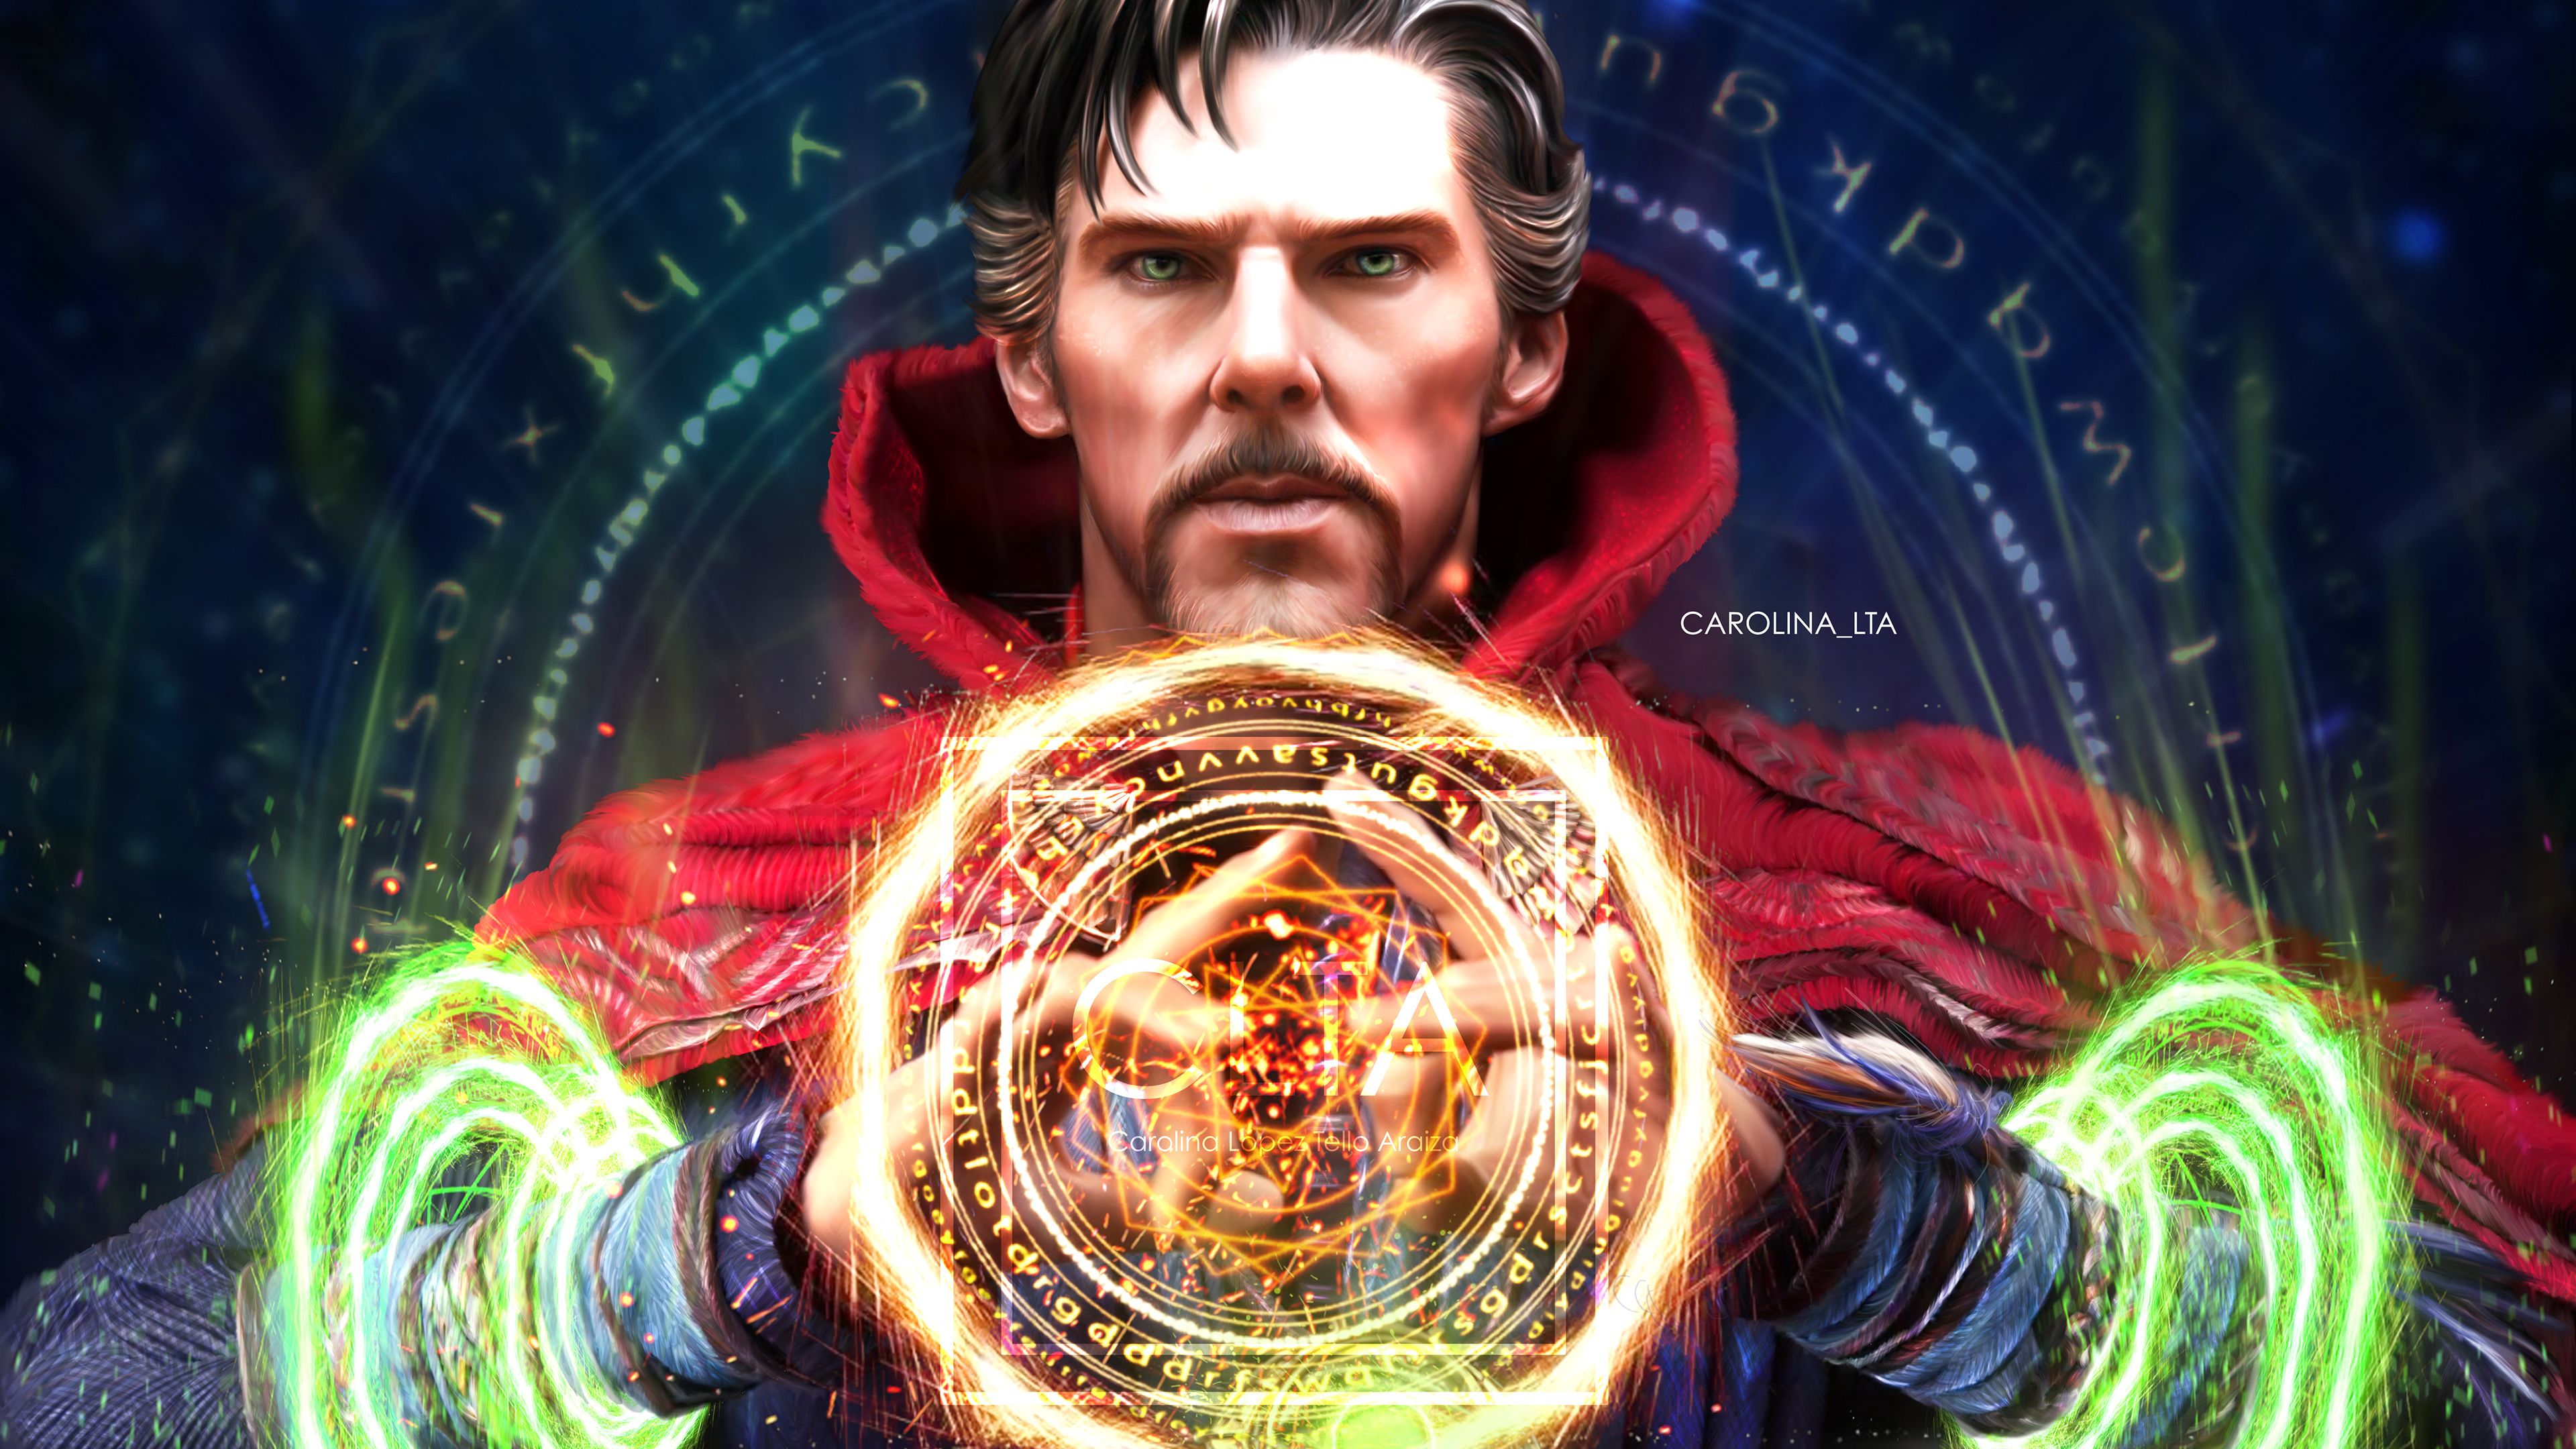 Dr Strange Laptop Full HD 1080P HD 4k Wallpaper, Image, Background, Photo and Picture